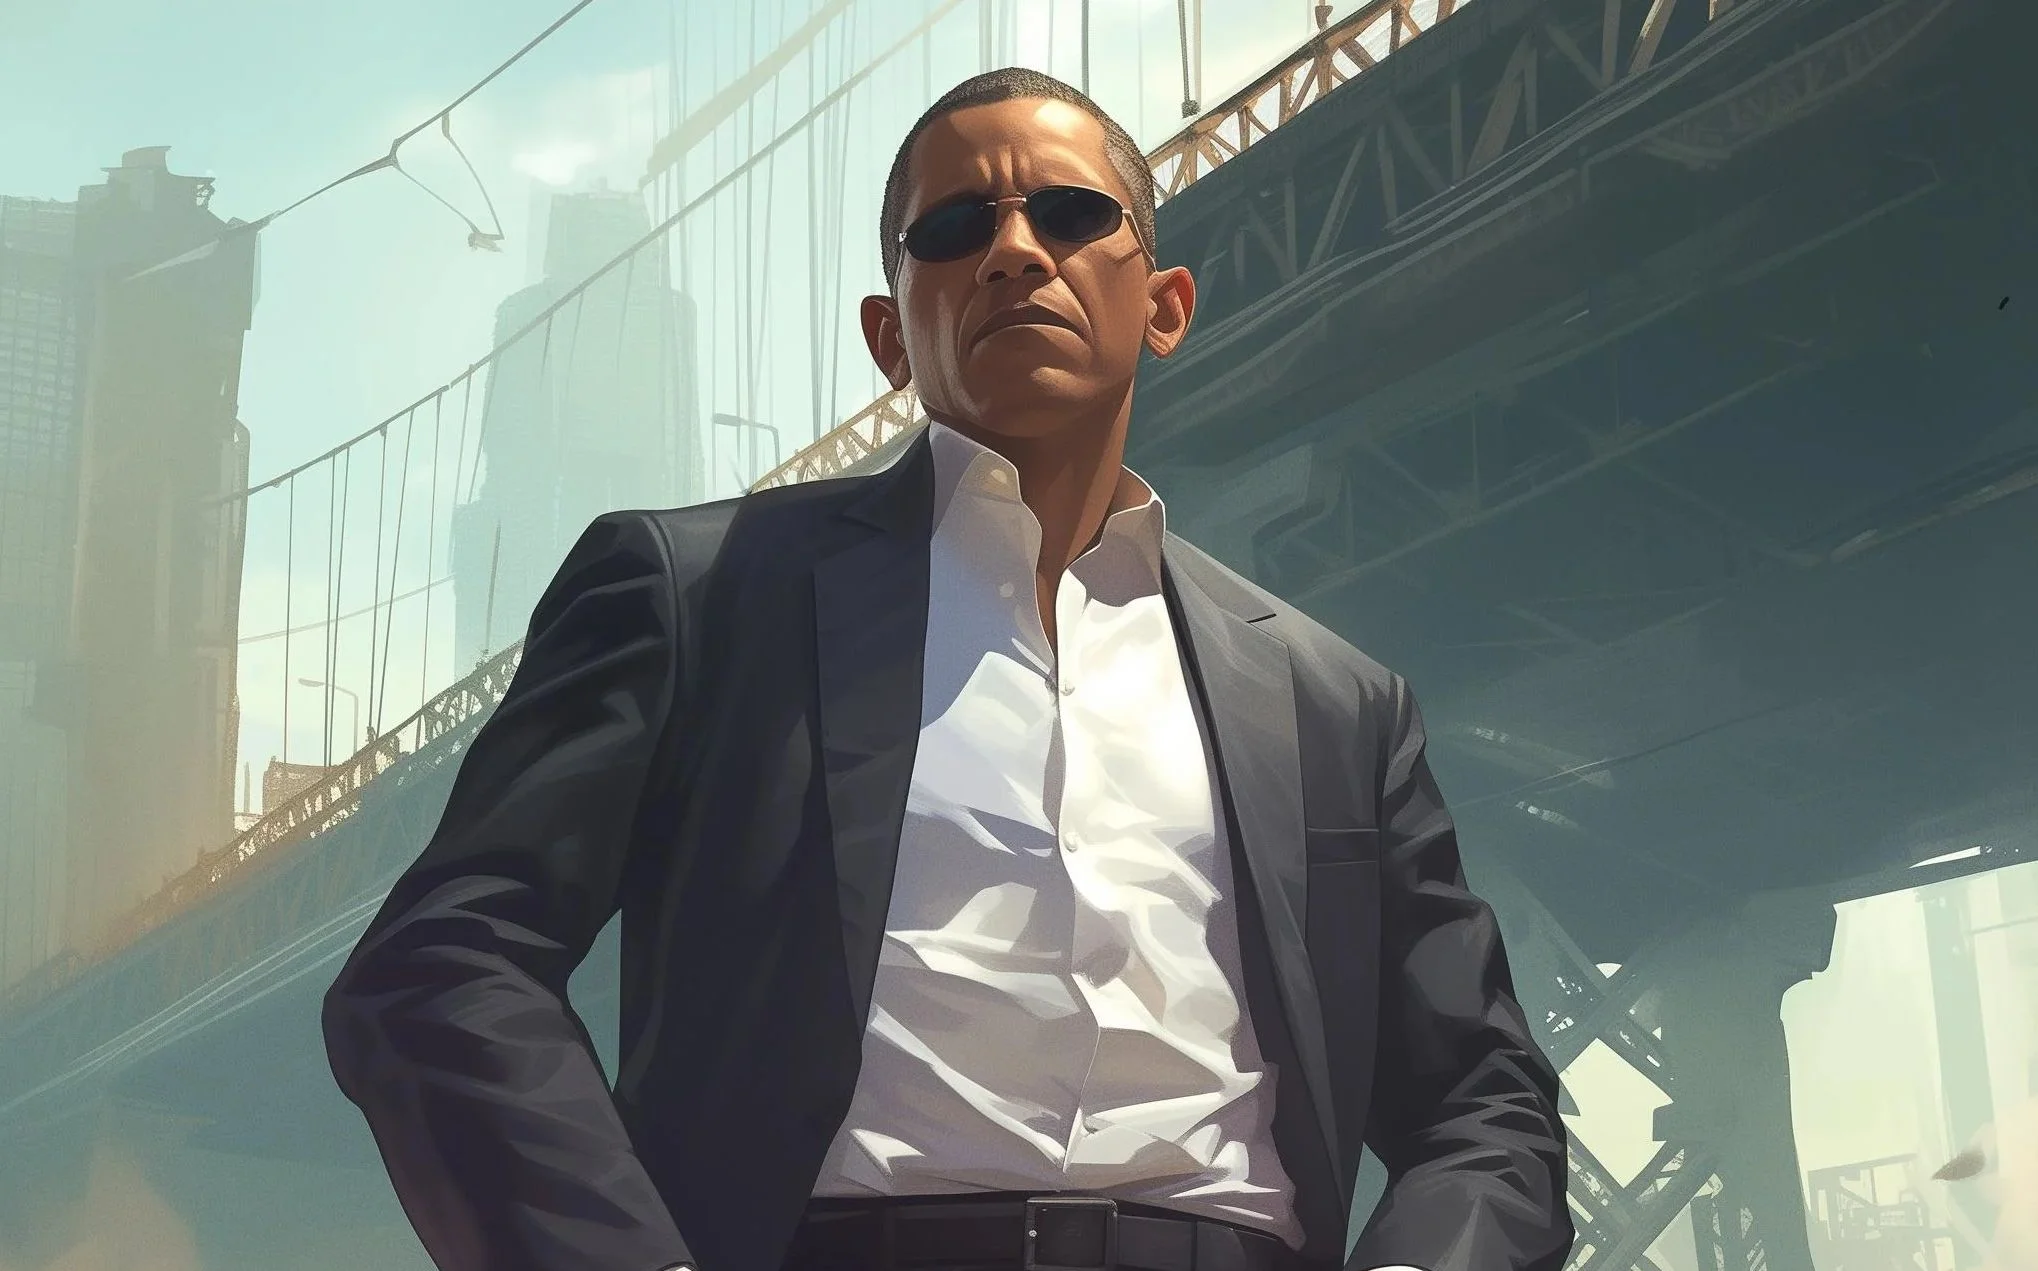 Redditor made US presidents into characters from GTA 5